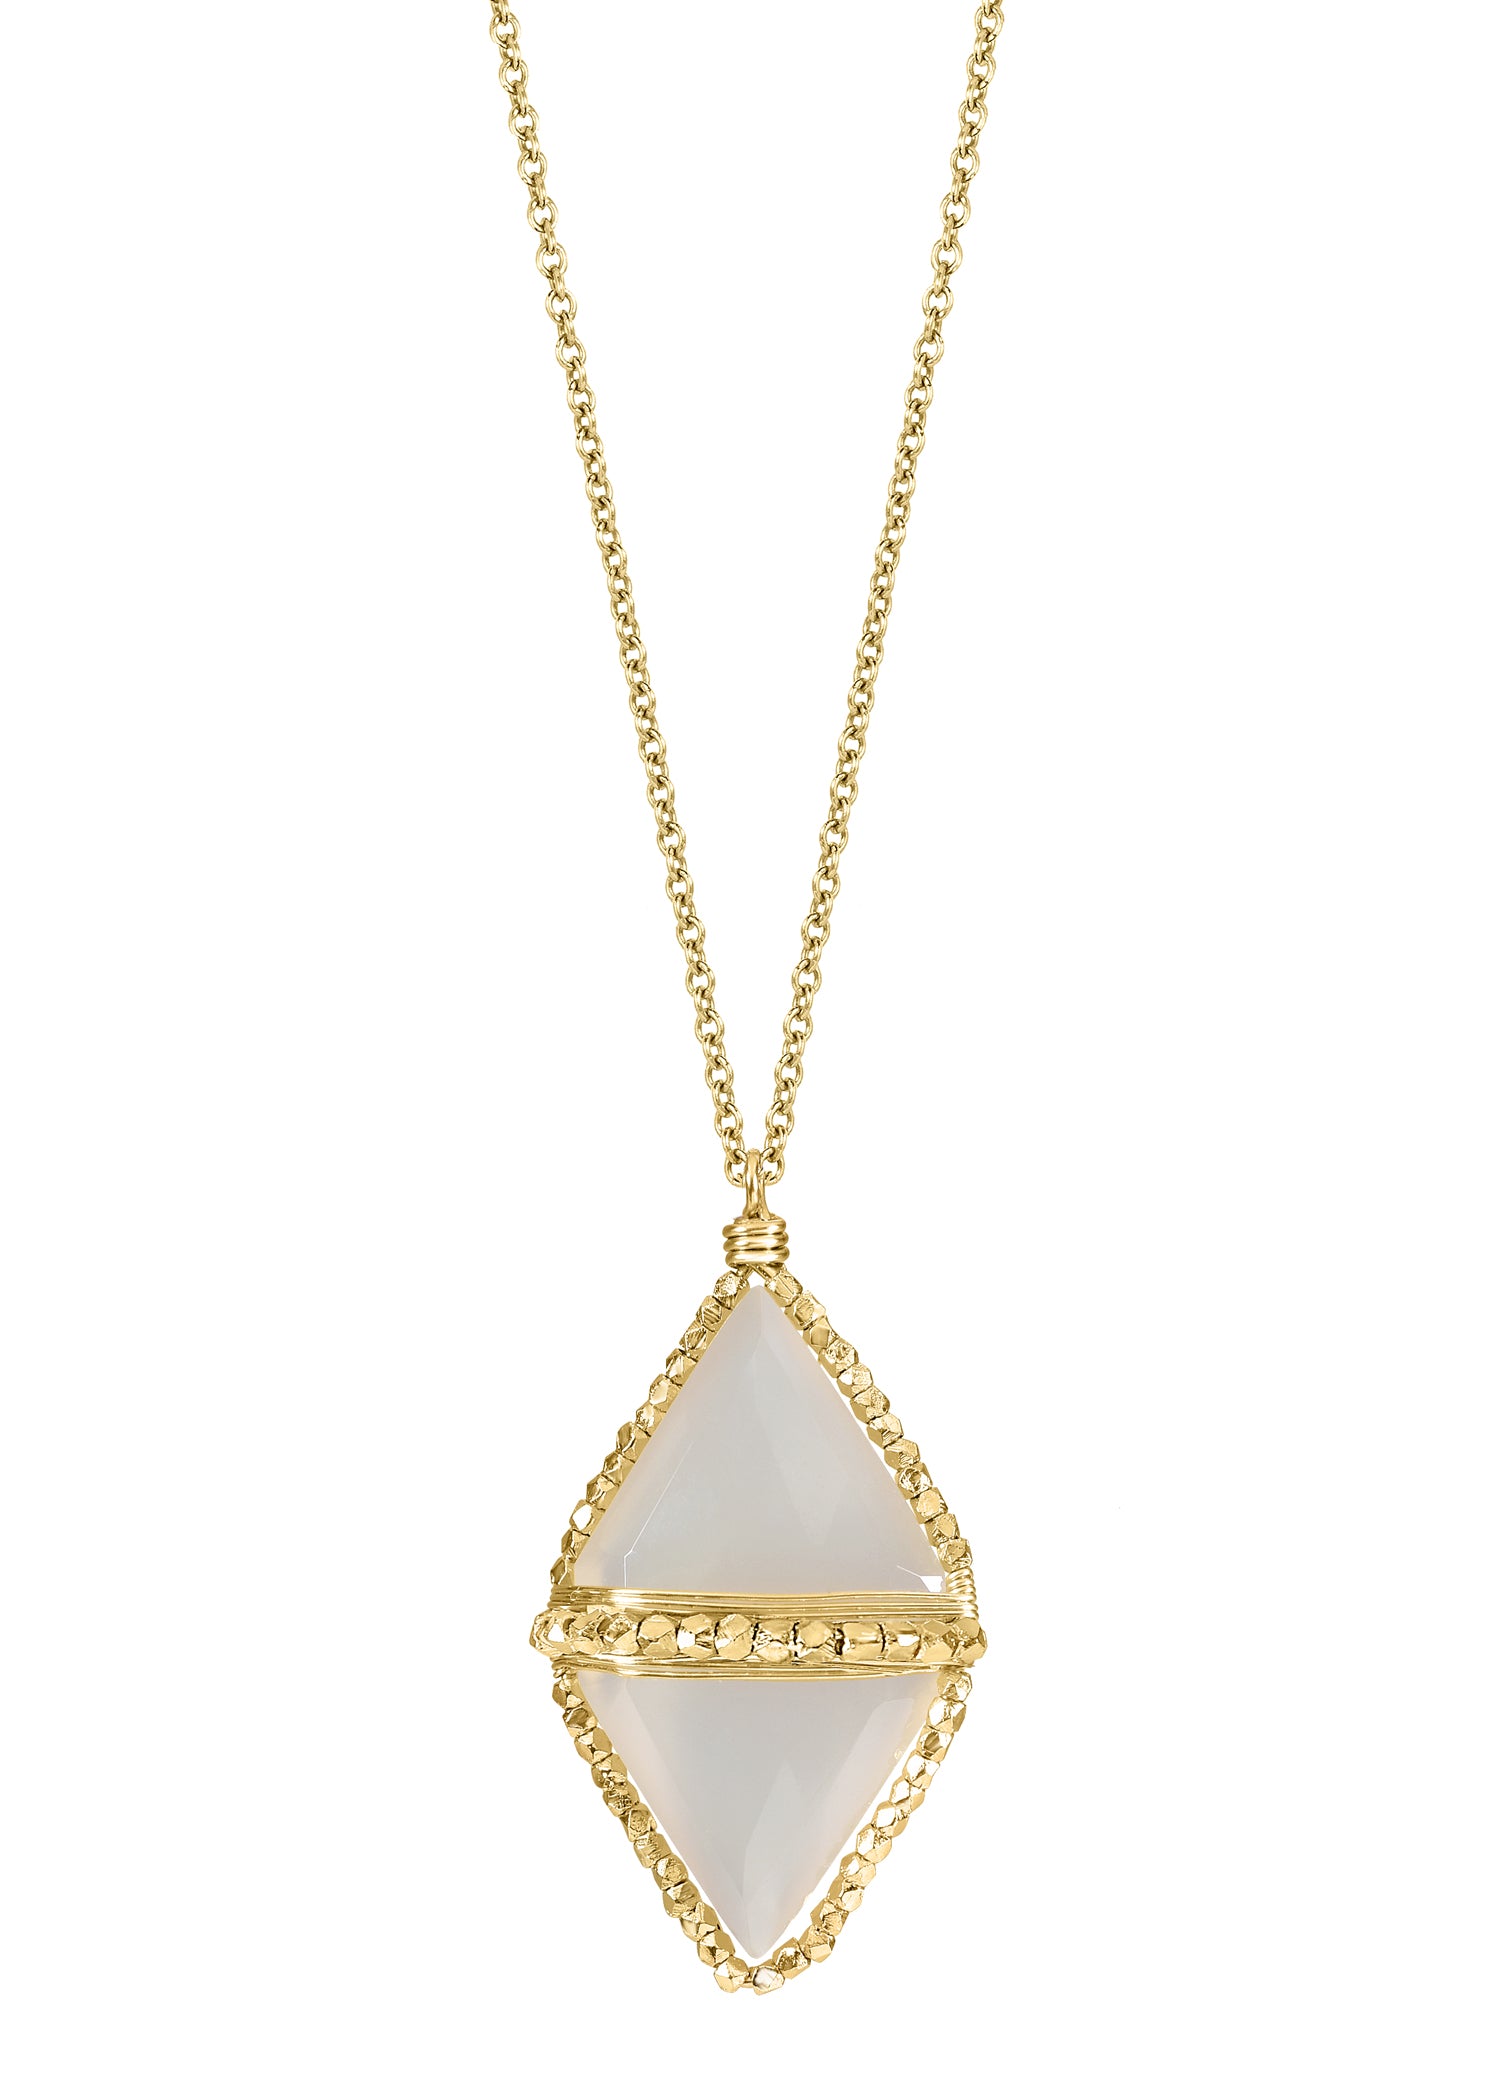 White moonstone 14k gold fill 14k gold vermeil sterling silver beads Necklace measures 22" in length Pendant measures 1" in length and 5/8" in width Handmade in our Los Angeles studio